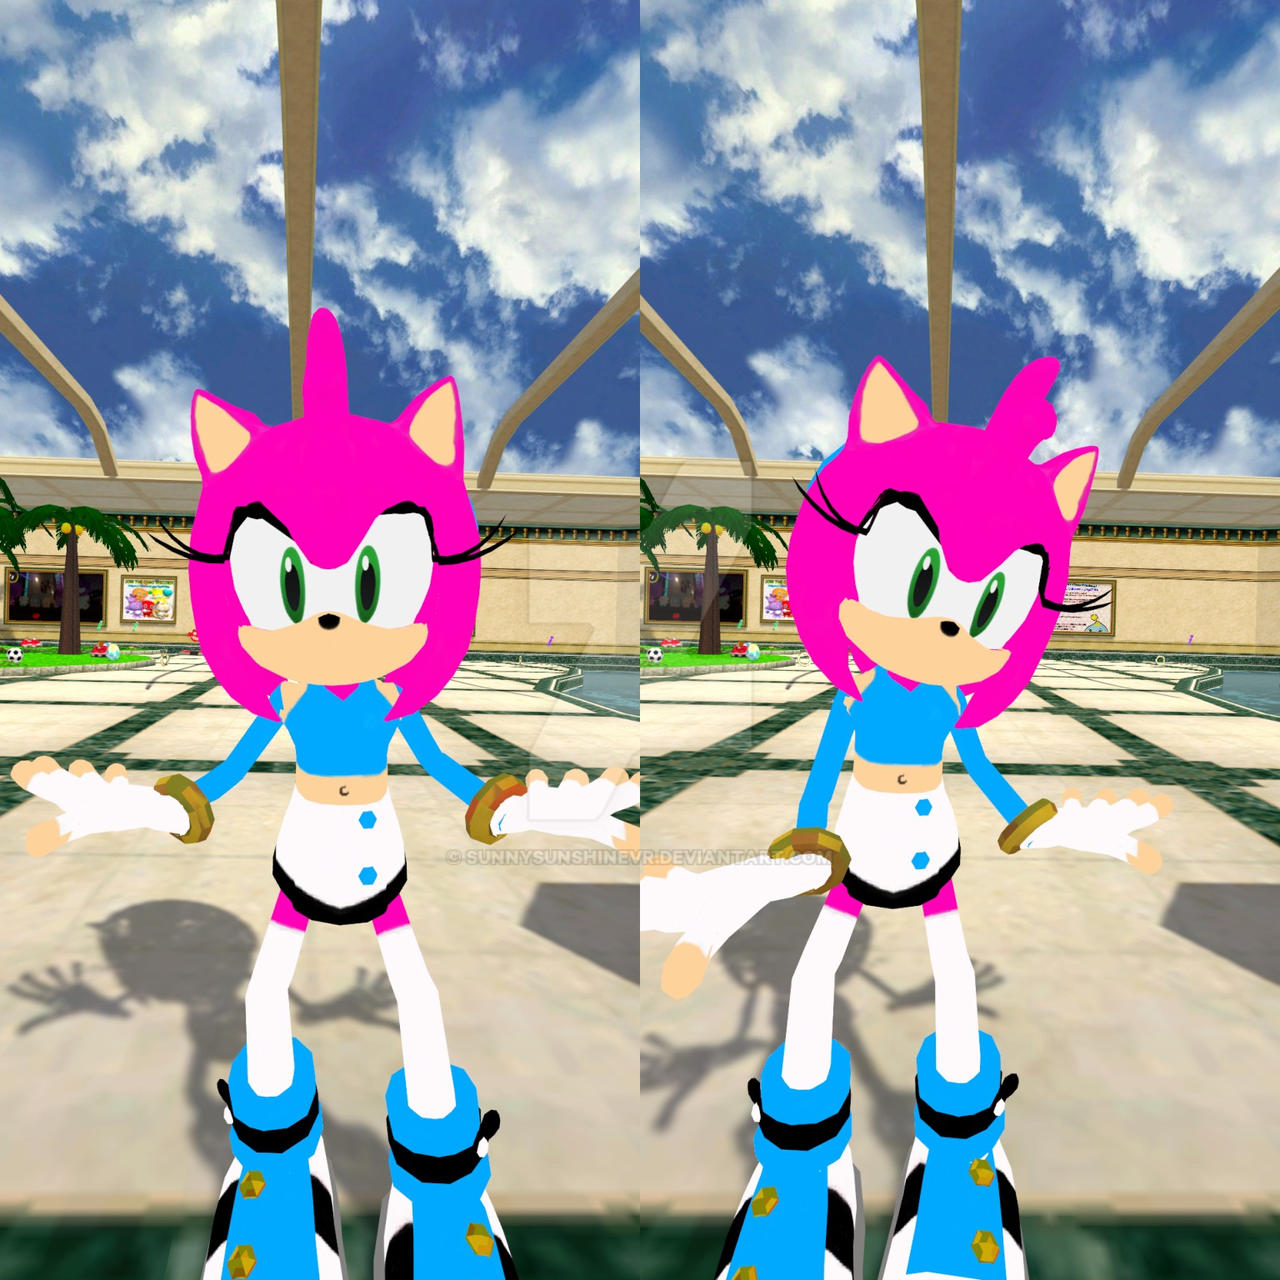 AMY MEETS SONIC'S DAD IN VR CHAT! SONIC'S BREAKING POINT! 